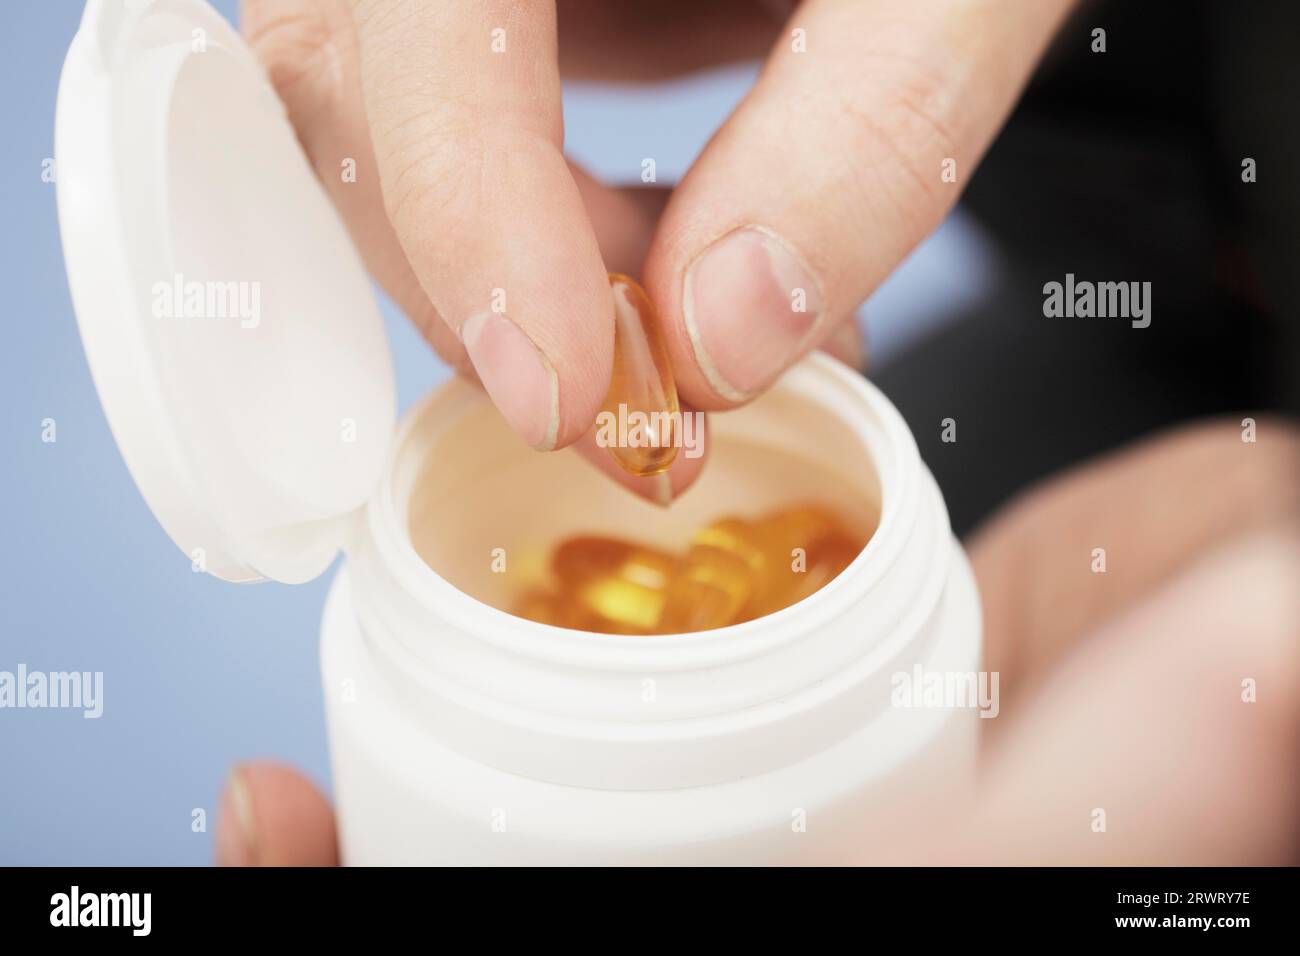 Fingers taking Omega 3 fish oil capsule from a bottle Stock Photo